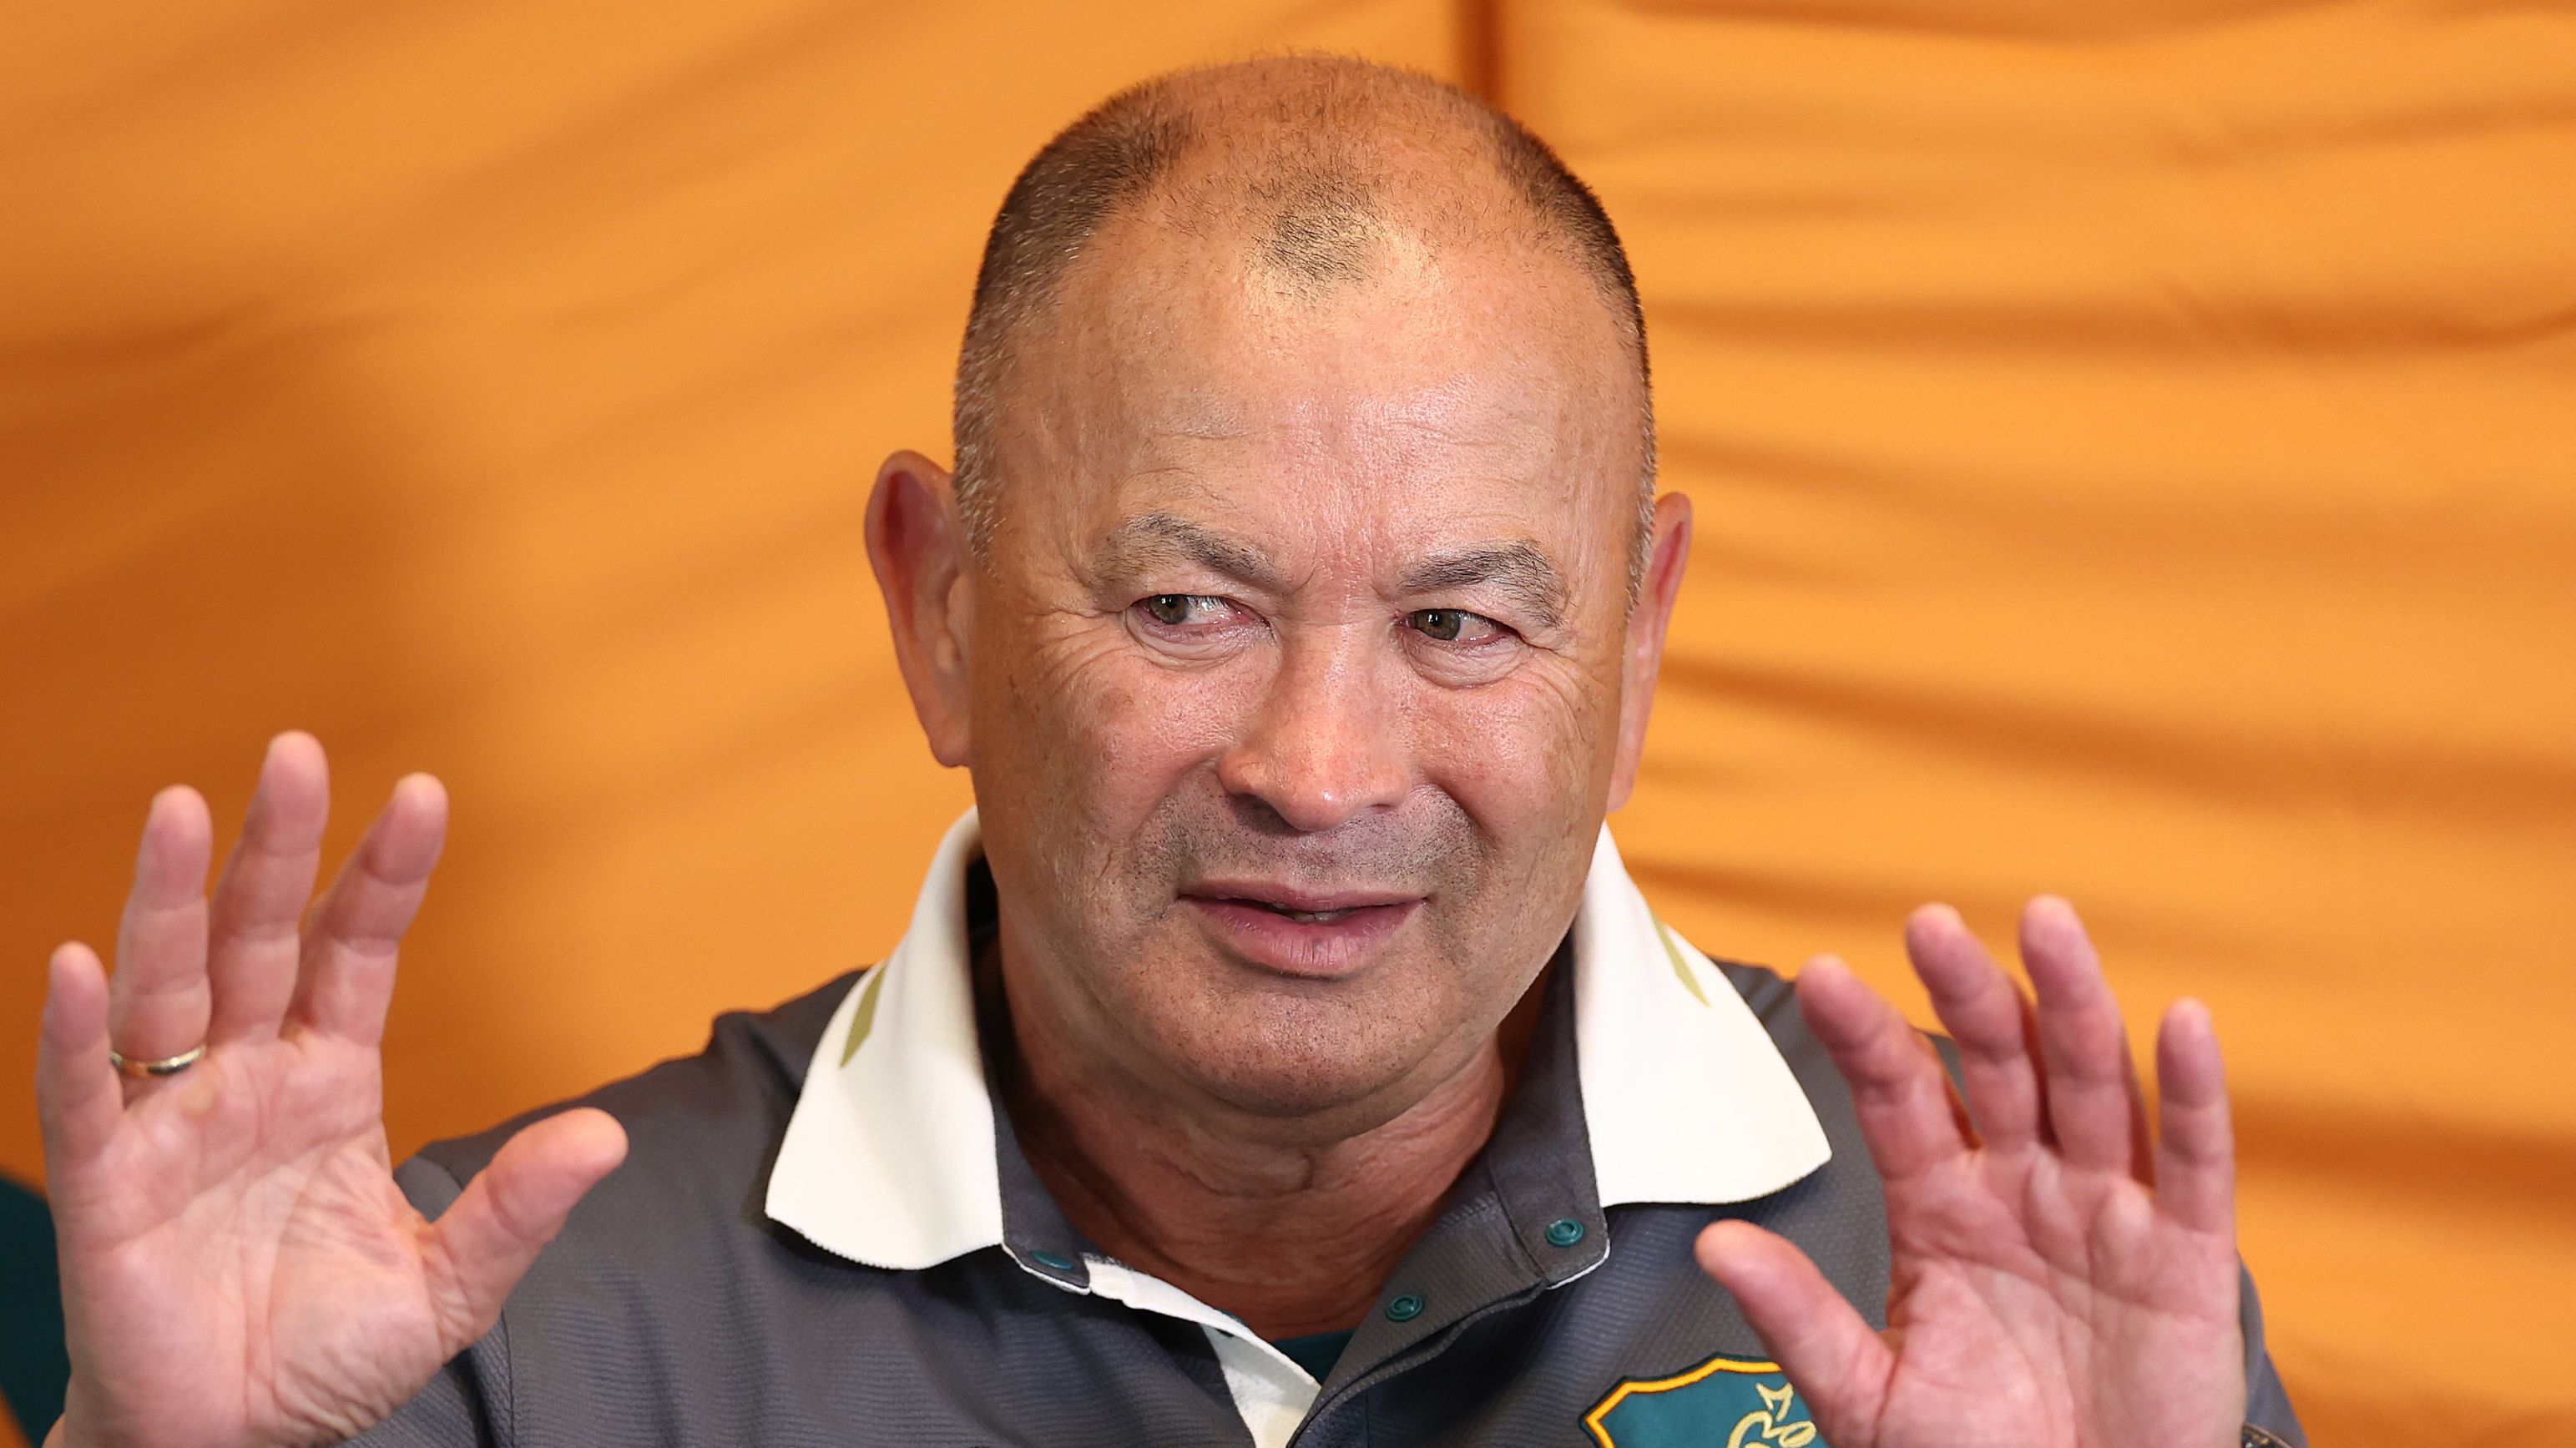 Wallabies head coach Eddie Jones speaks to media during an press conference ahead of the Rugby World Cup in France.